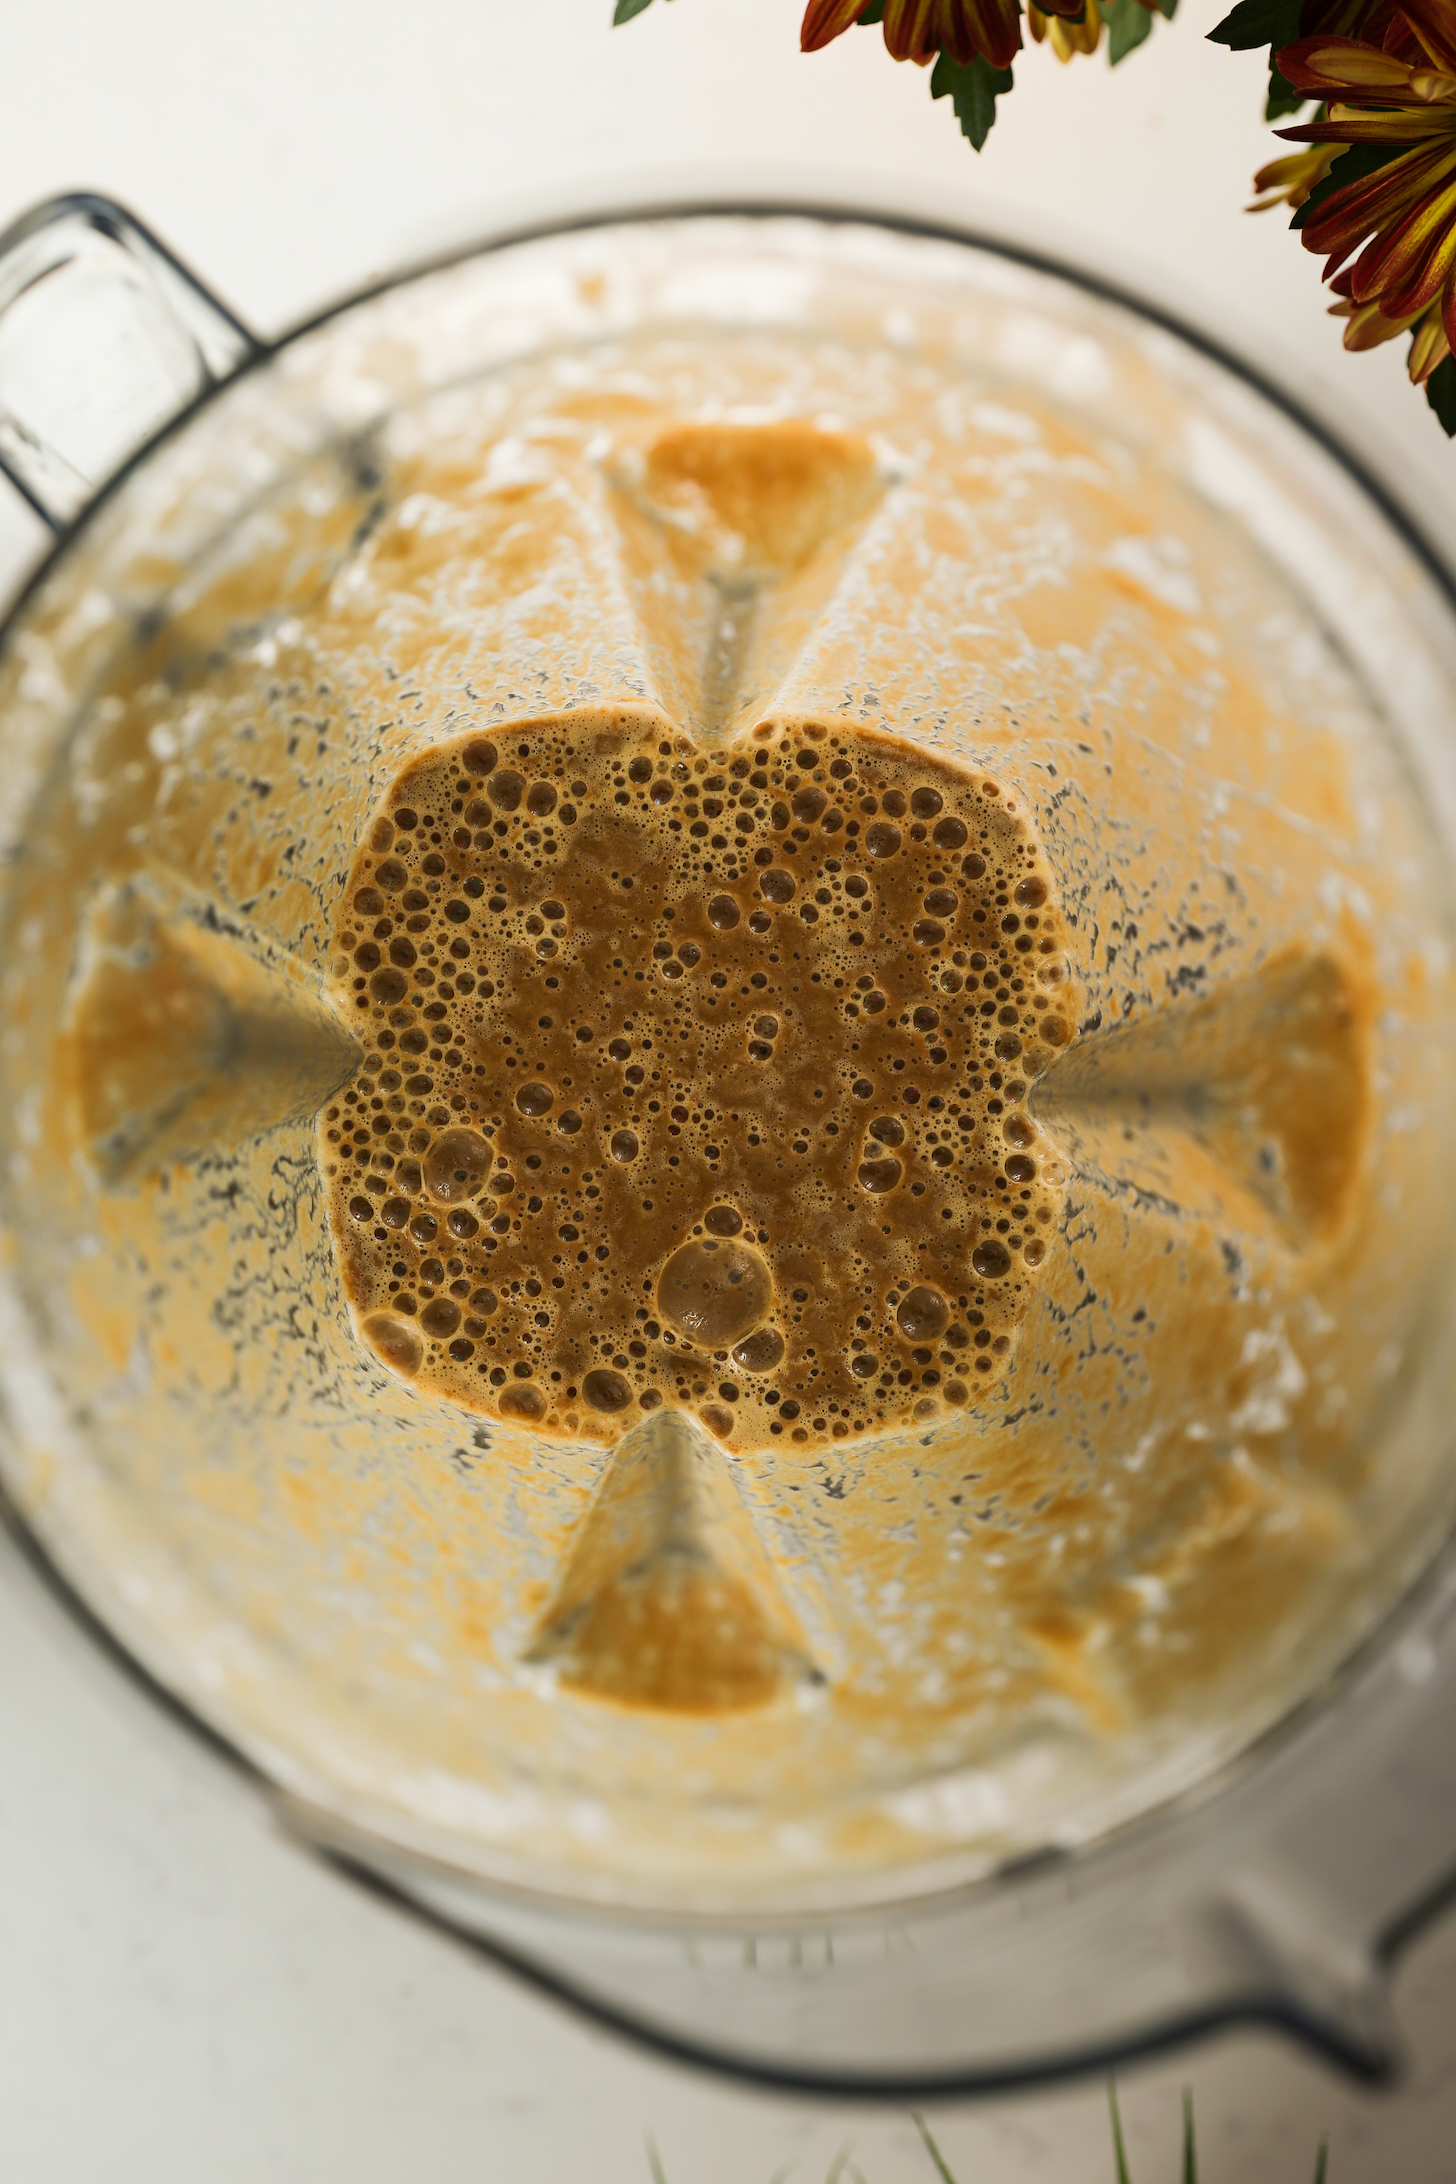 A top-down view of a blender with a frothy brown liquid after blending.